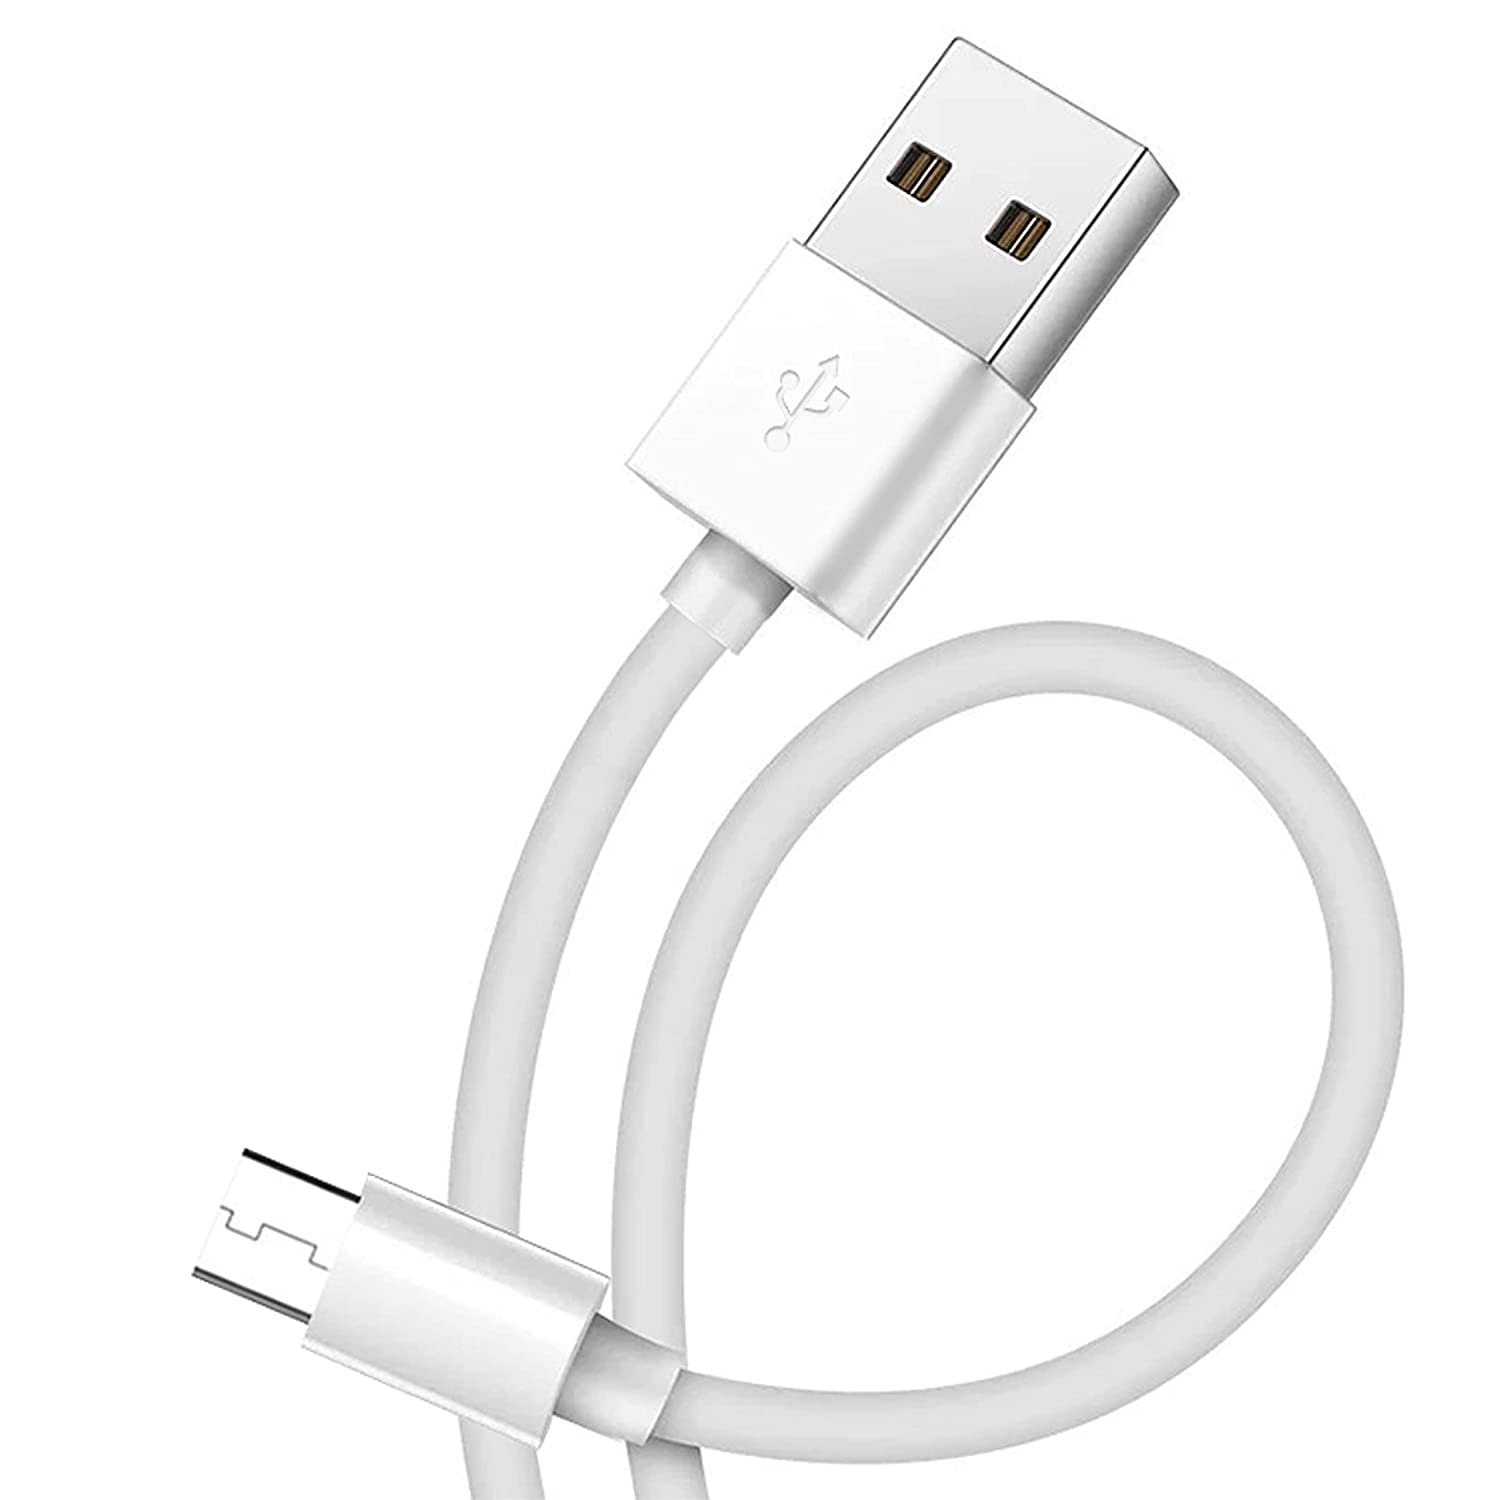 s3 USB Cable | Micro USB Data Cable | Sync Quick Fast Charging Cable |  Charger Cable | Android V8 Cable ZBM 8=( Amp, 1 Meter, BLACK OR White))  - Royal Computer Solution